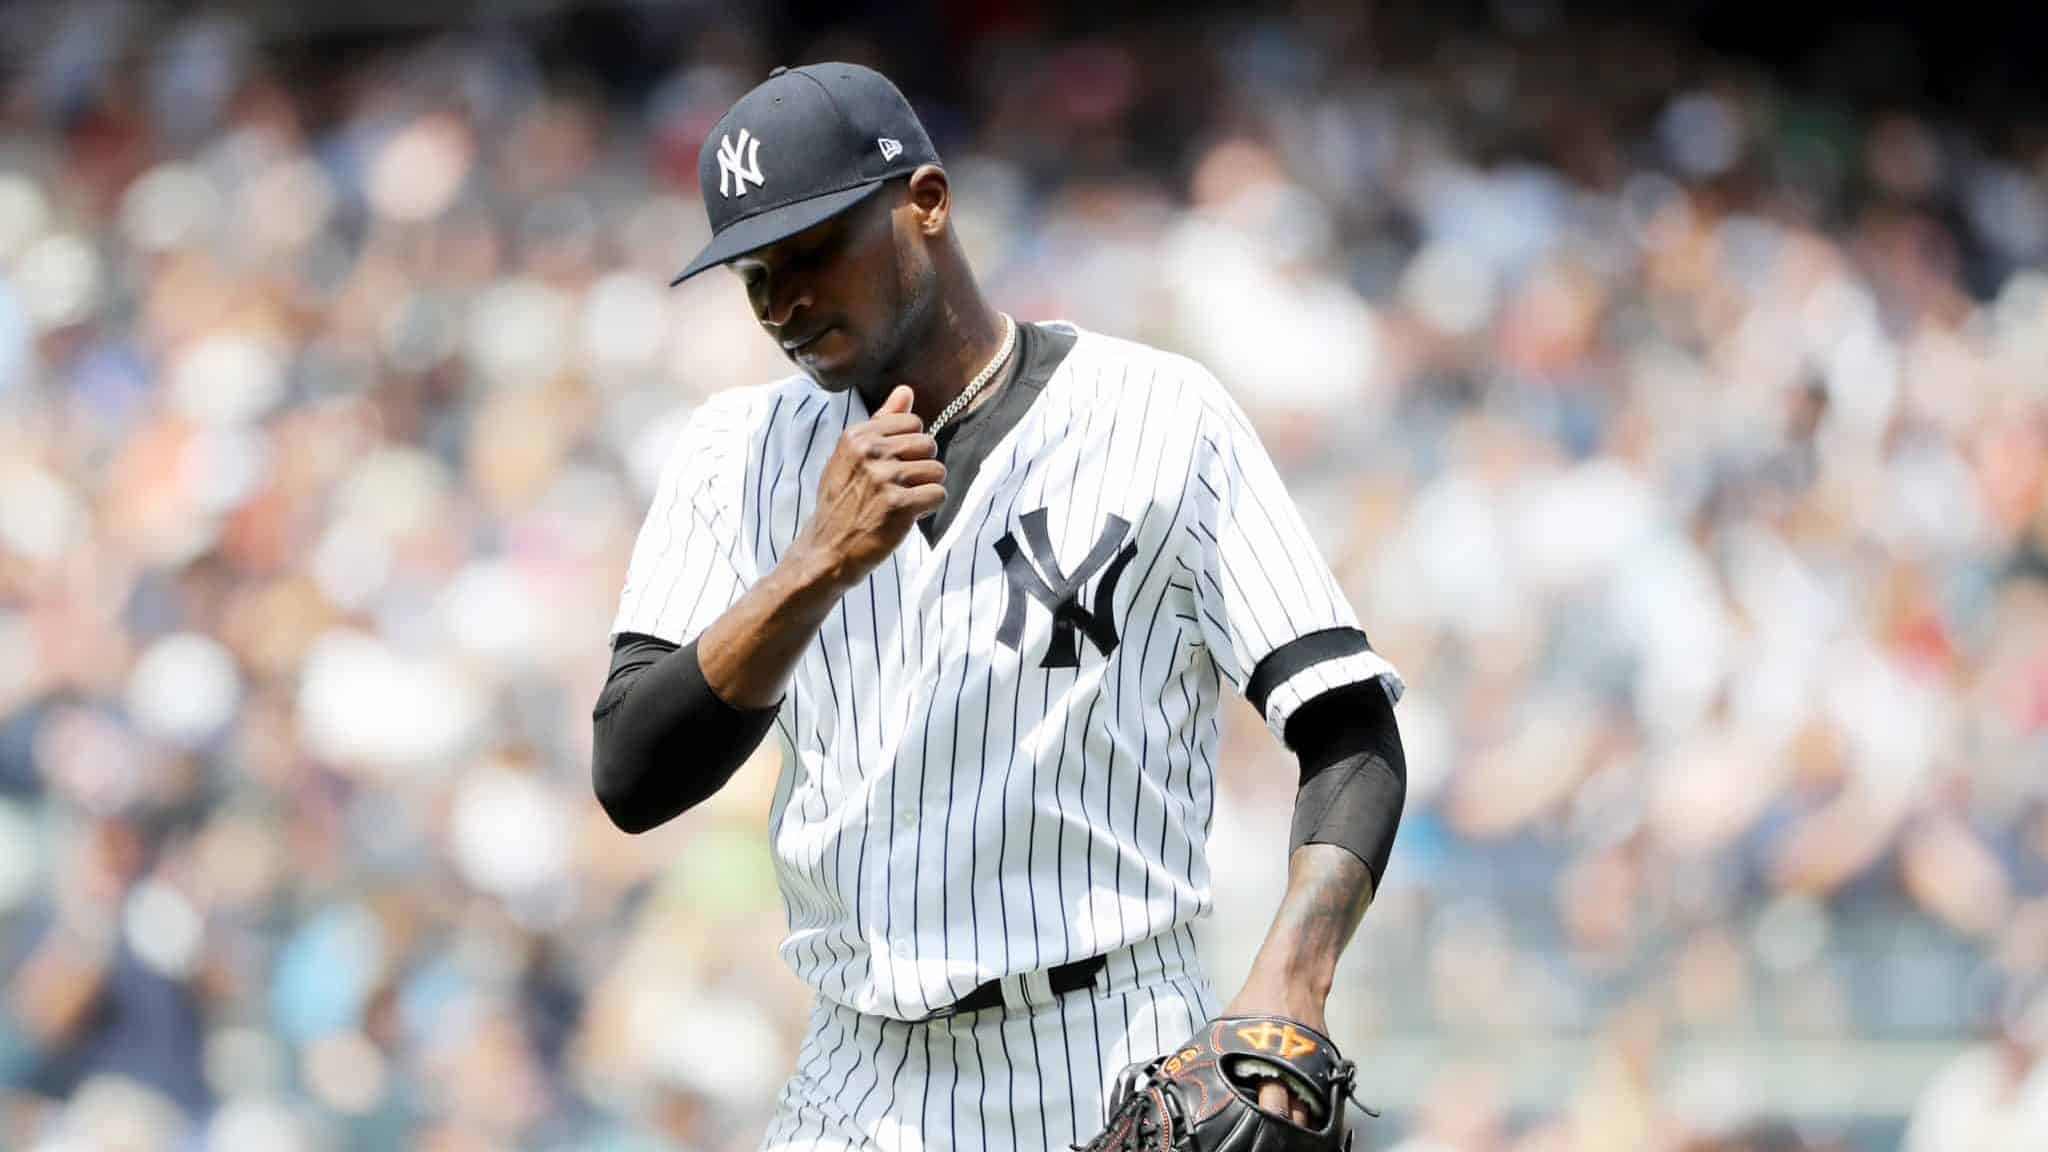 NEW YORK, NEW YORK - AUGUST 03: Domingo German #55 of the New York Yankees celebrates as he walks off the field in the fourth inning against the Boston Red Sox during game one of a double header at Yankee Stadium on August 03, 2019 in the Bronx borough of New York City.